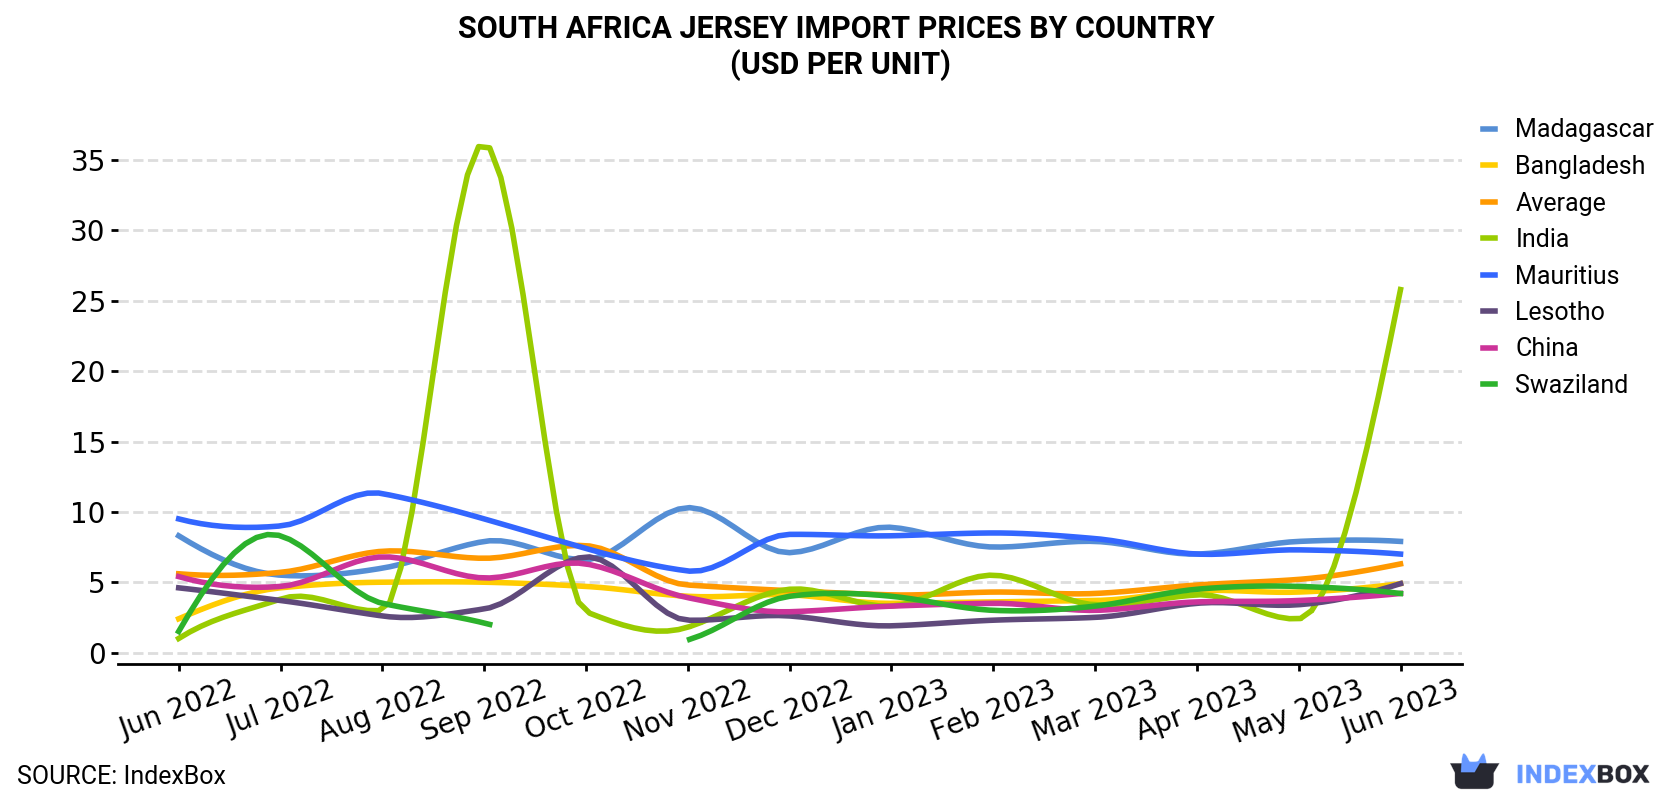 South Africa Jersey Import Prices By Country (USD Per Unit)